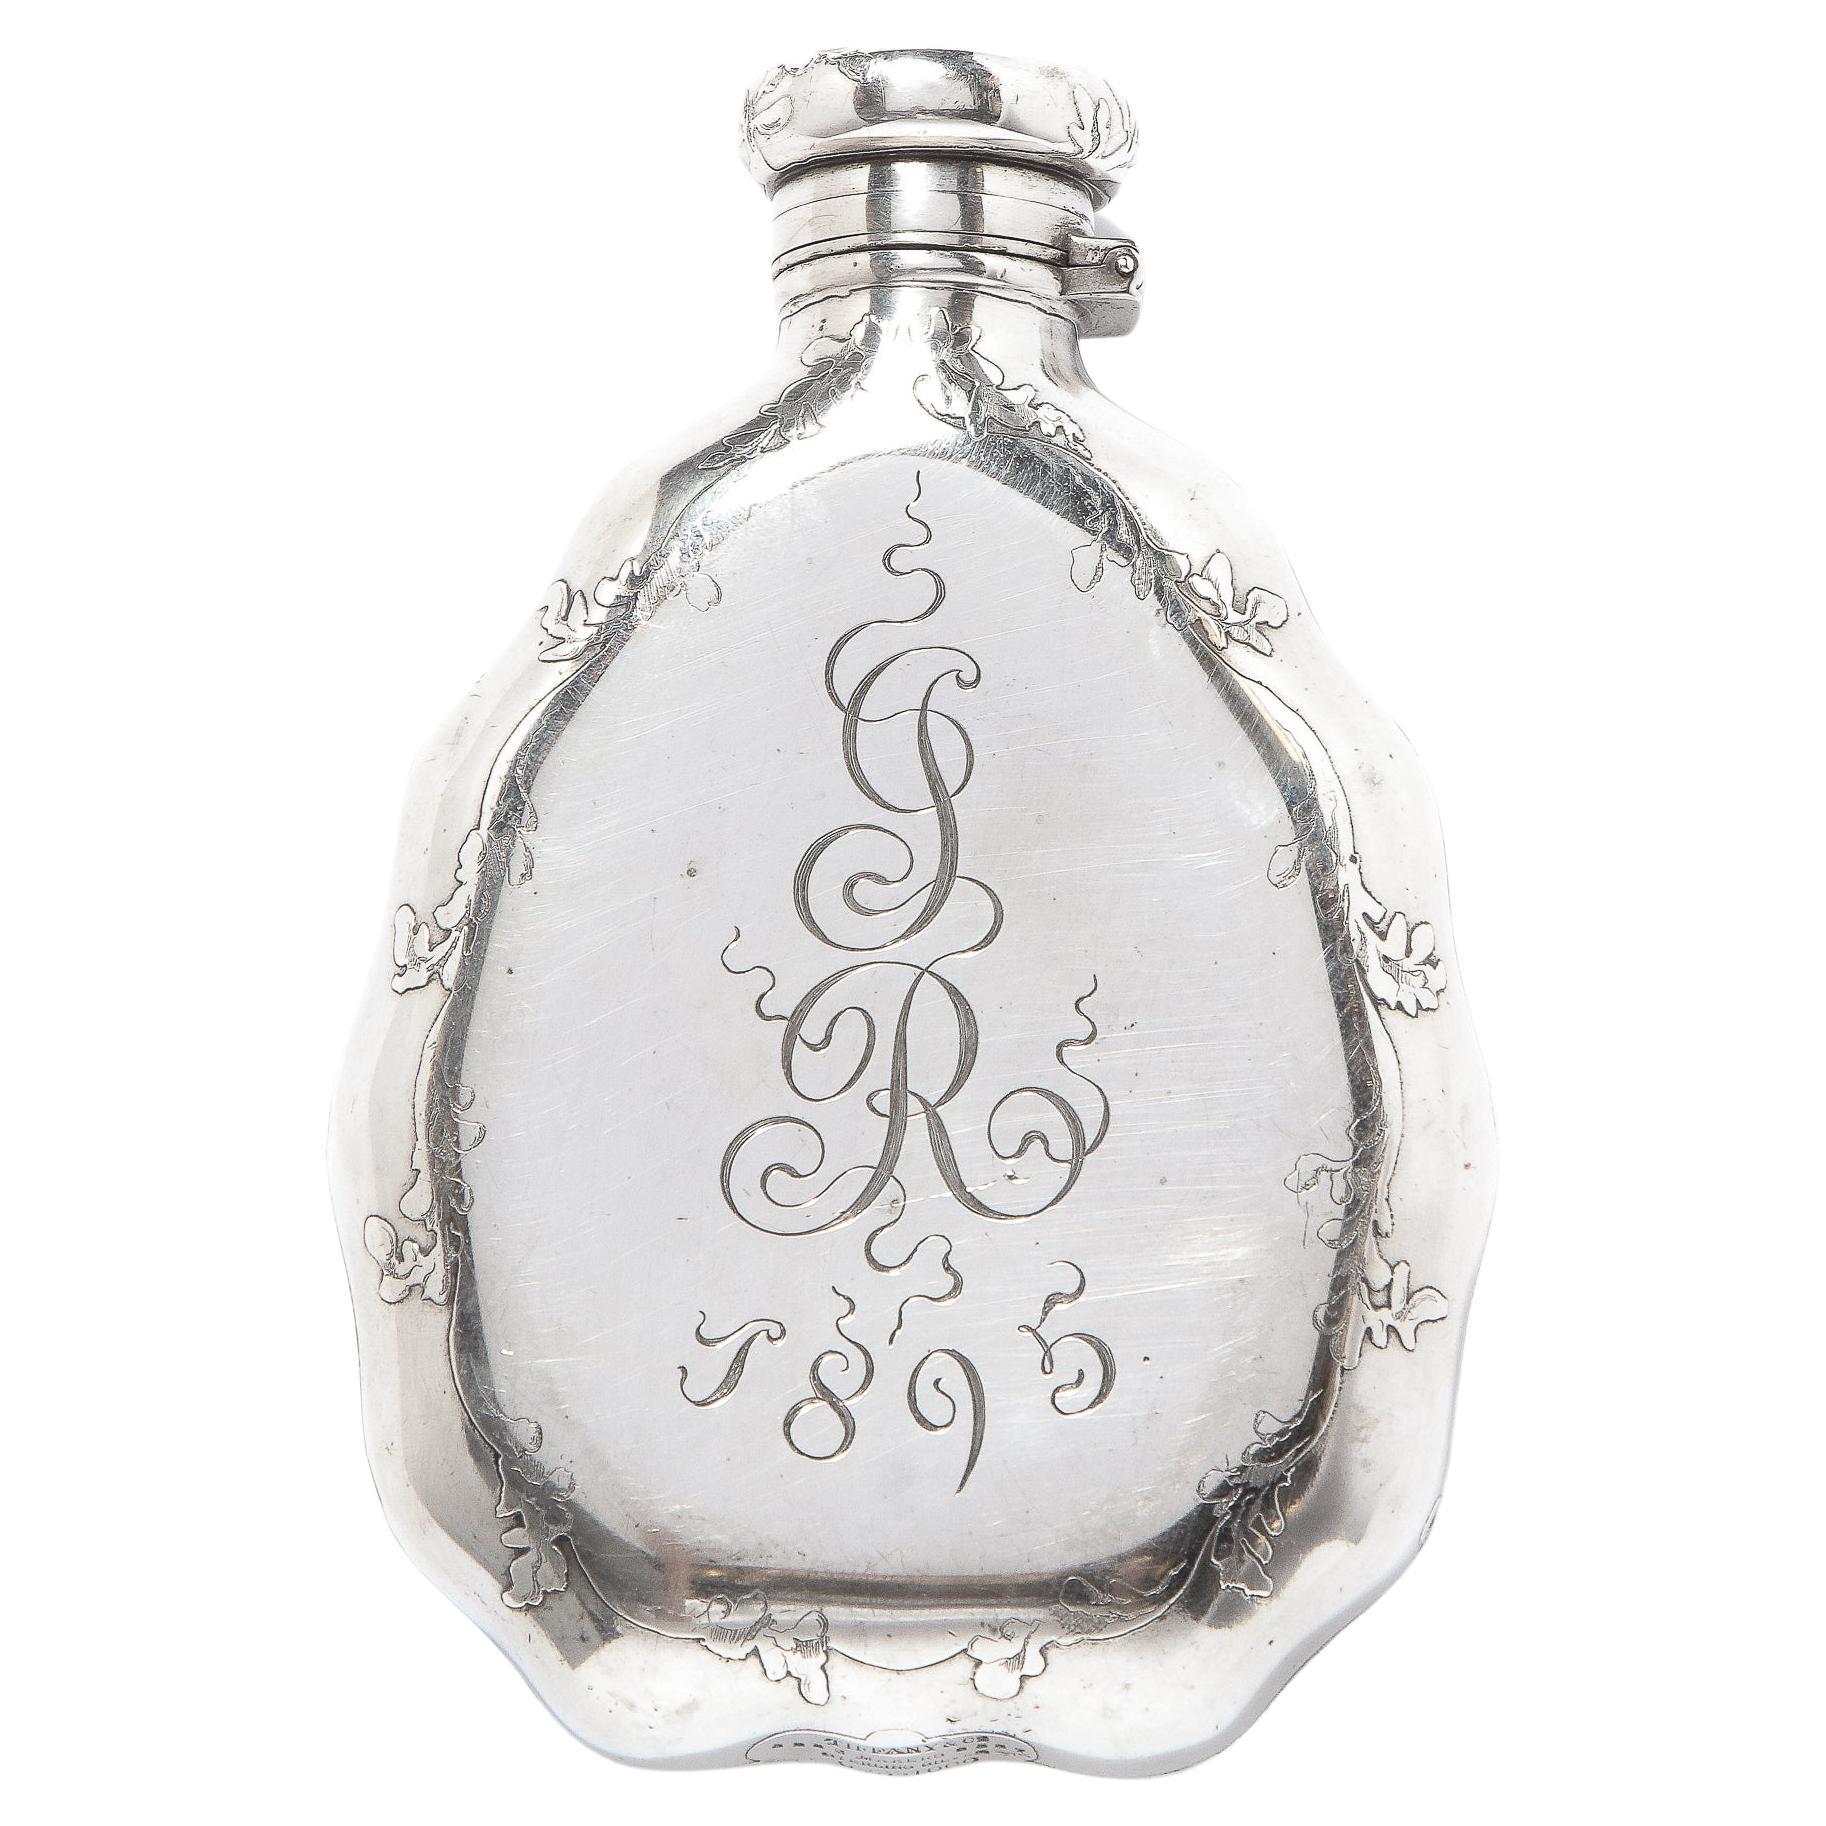 Sterling Silver 19th Century Tiffany & Co. Nautical Flask. Depicting a sail boat at sea with a nautical frame of shells and foliate design. Most surely from the America's Cup. With a monogram of GR and date of 1895 verso. Signed to underside